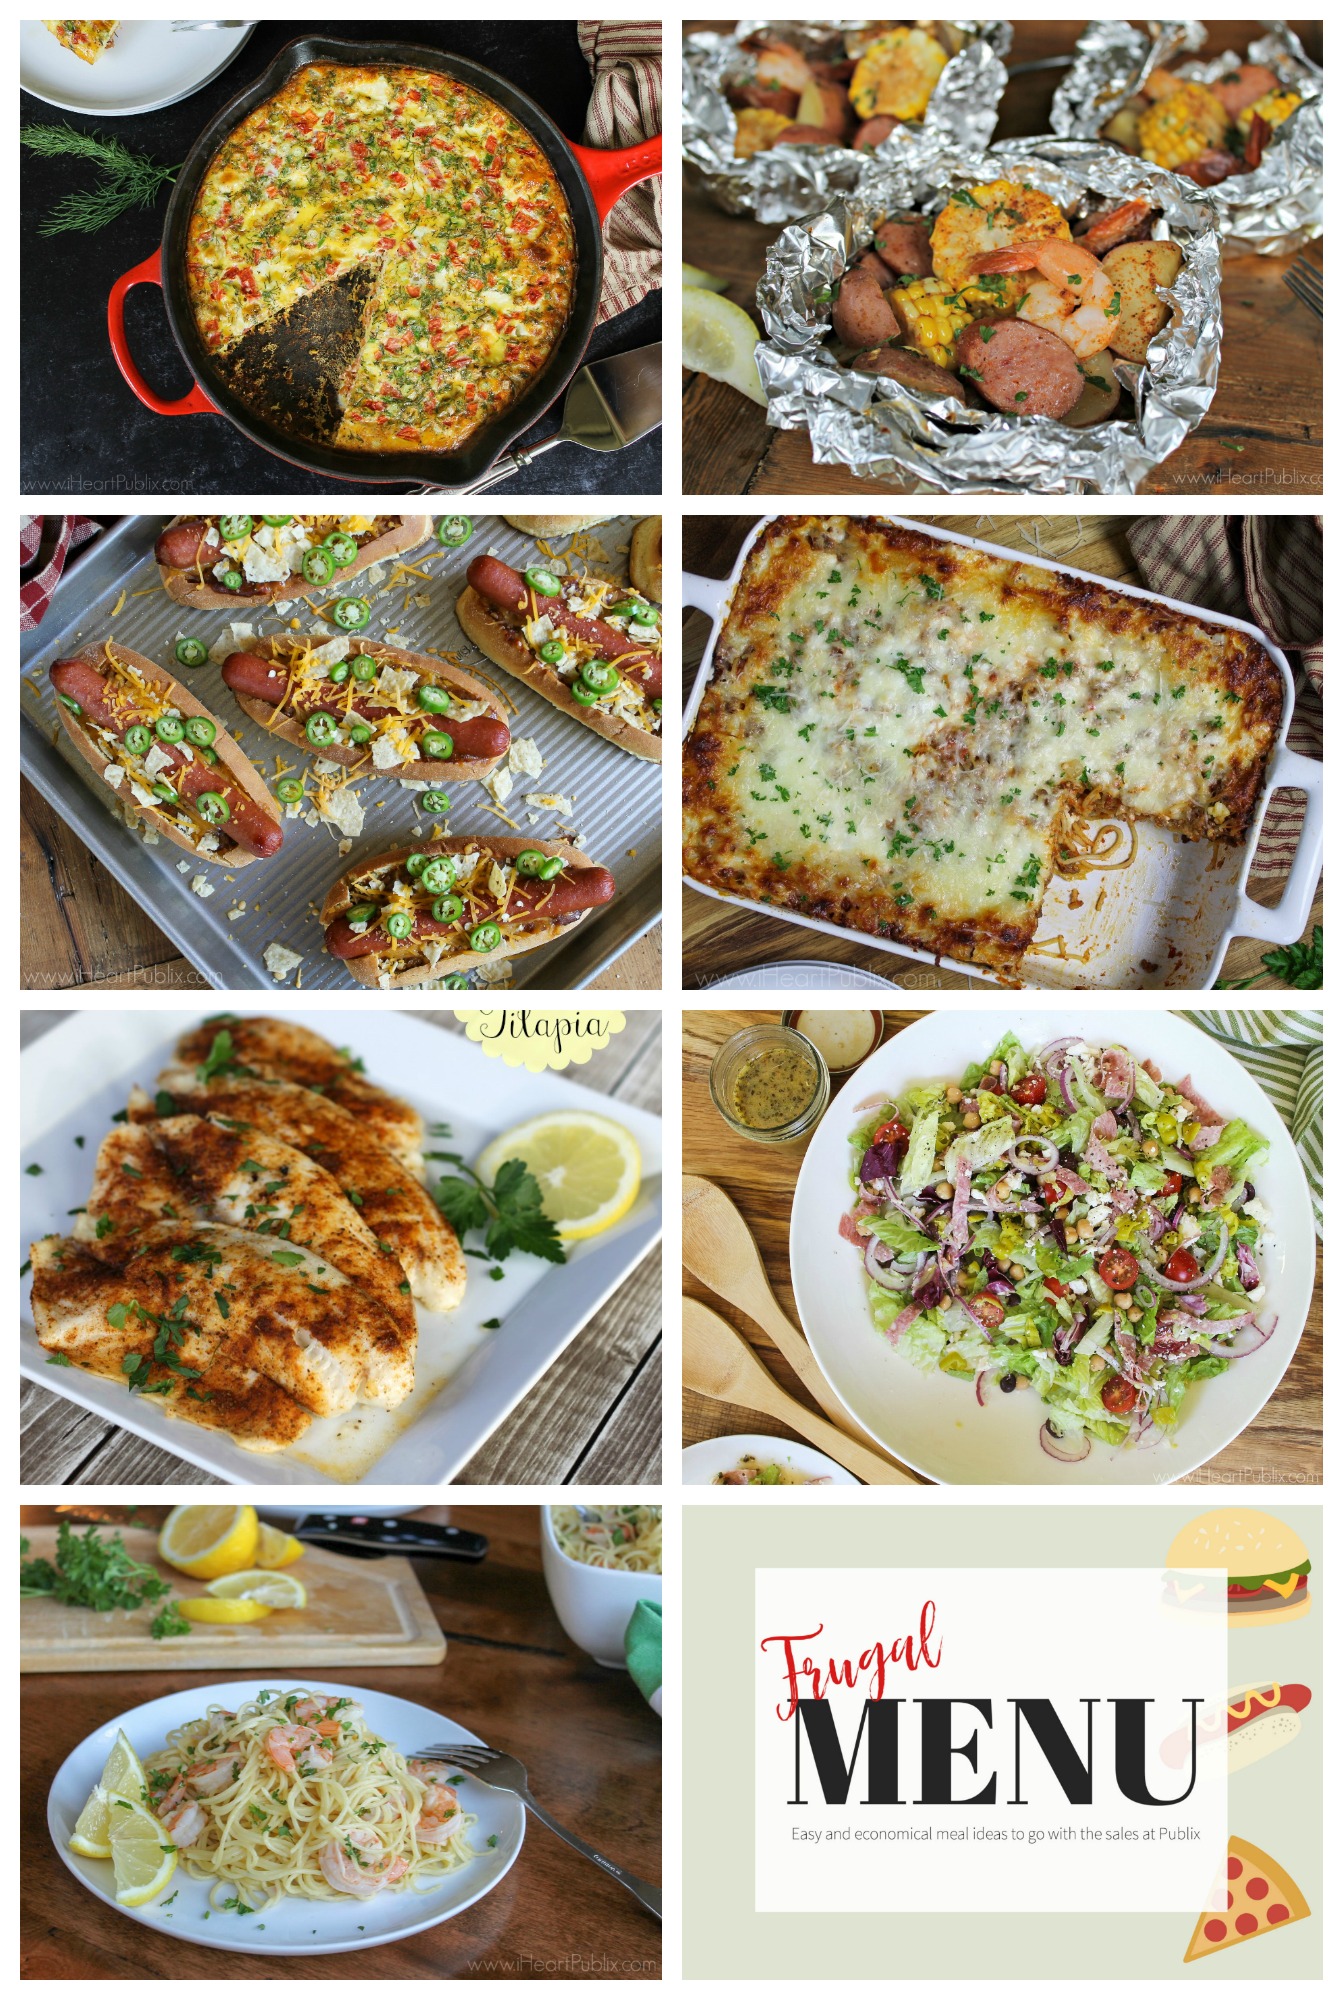 Frugal Family Menu For The Publix Sales Starting 5 14 Seven Meals That Won T Break Your Budget